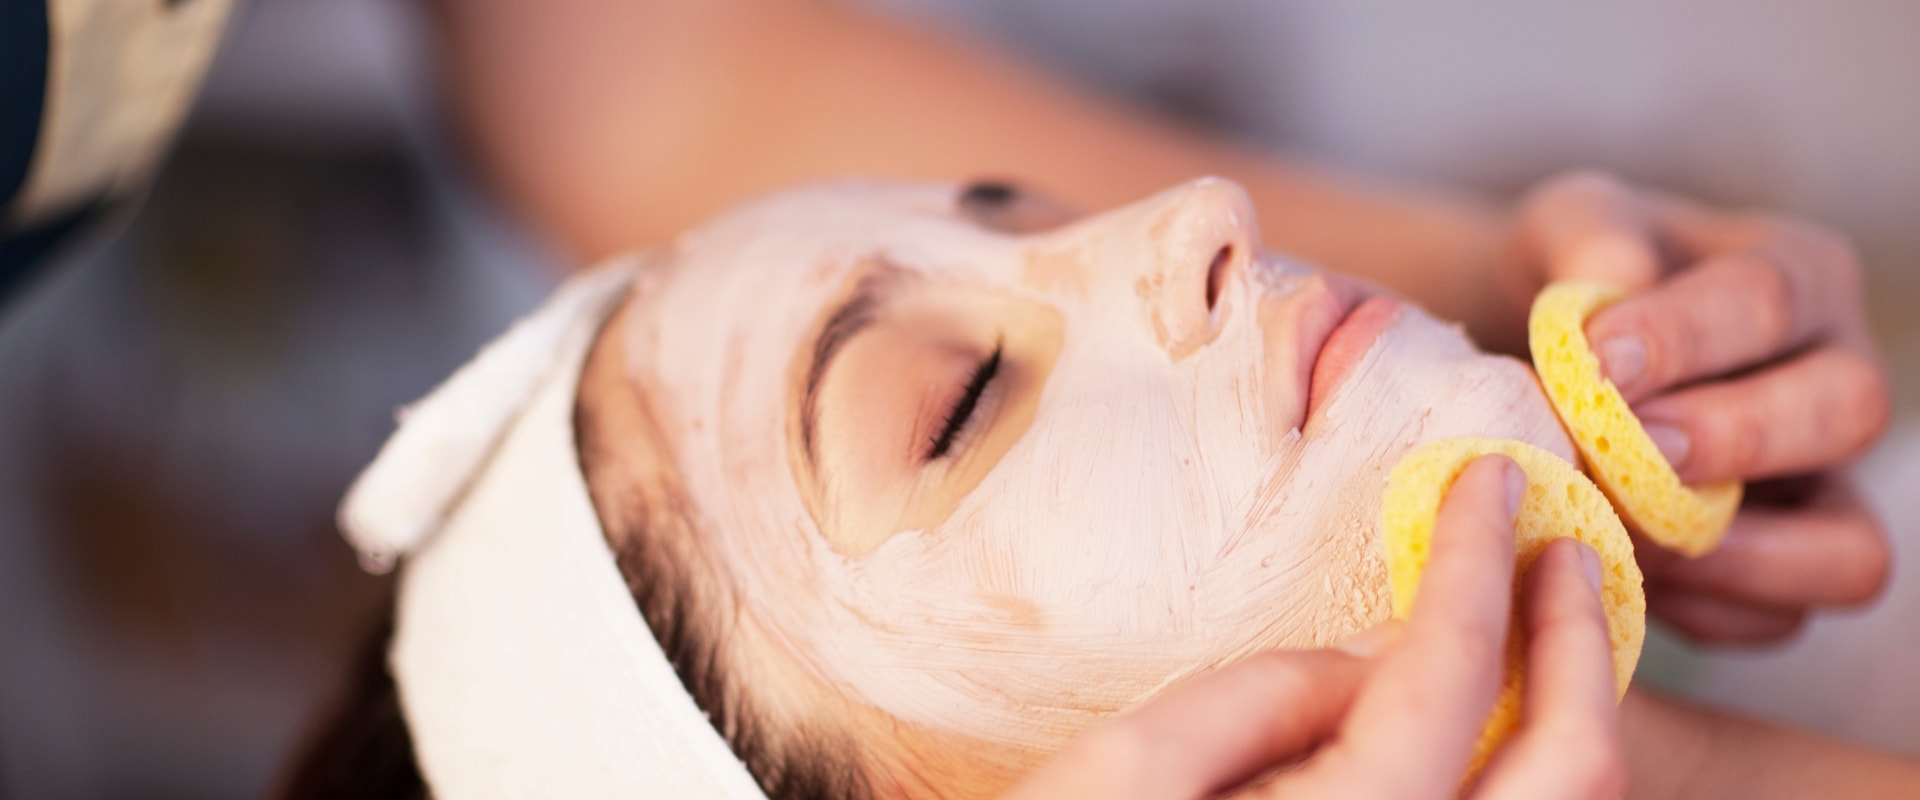 Beauty Treatments and Allergies: What You Need to Know